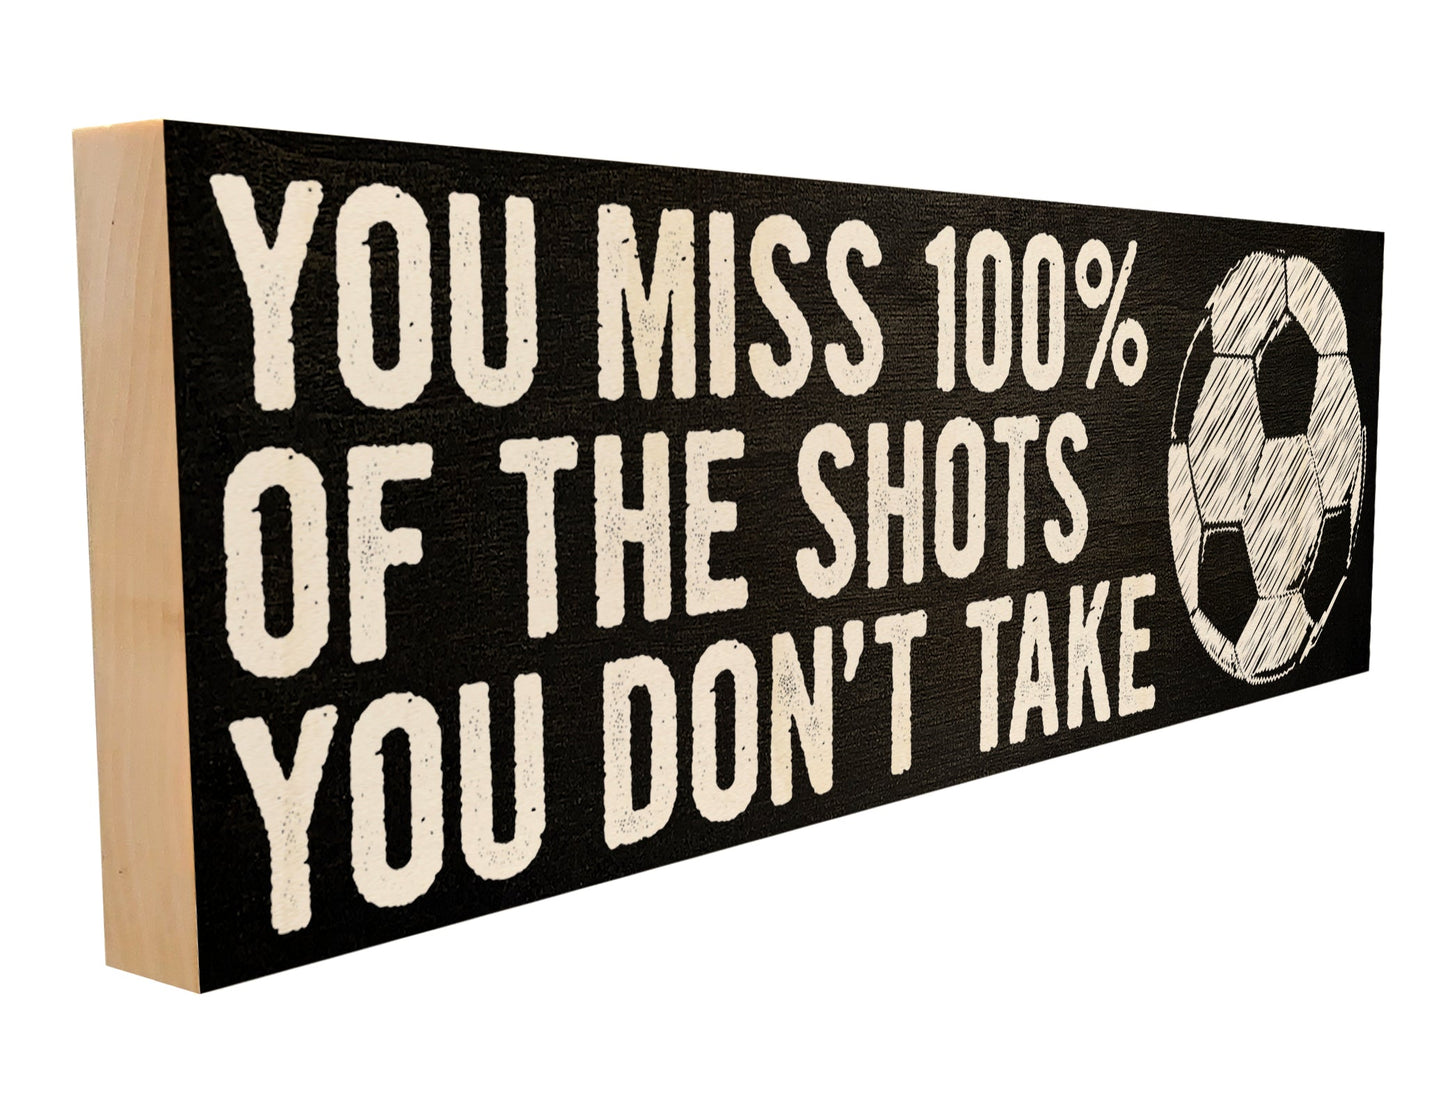 Soccer. You Miss 100% of the Shots you don't Take.